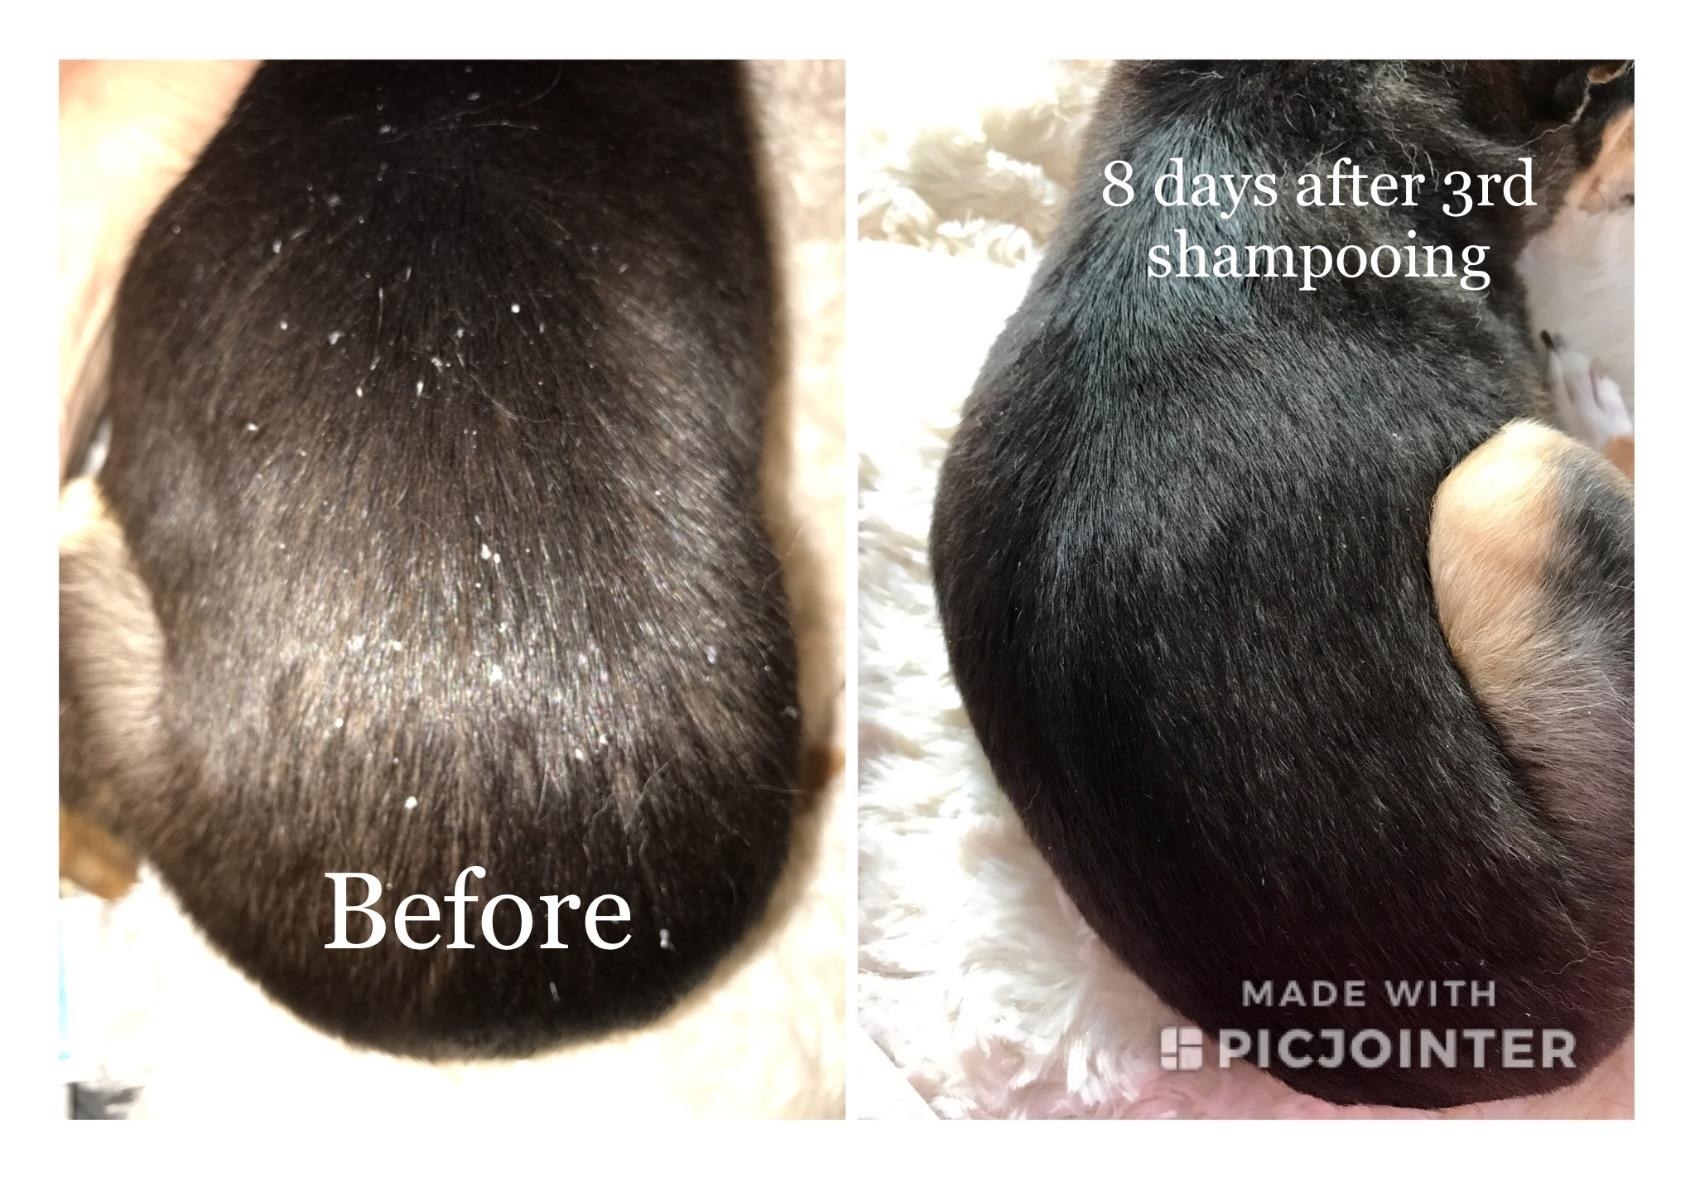 A reviewer photo showing &quot;Before,&quot; with dark fur with heavy dandruff, and &quot;After,&quot; the same fur, post-shampoo, with no dandruff